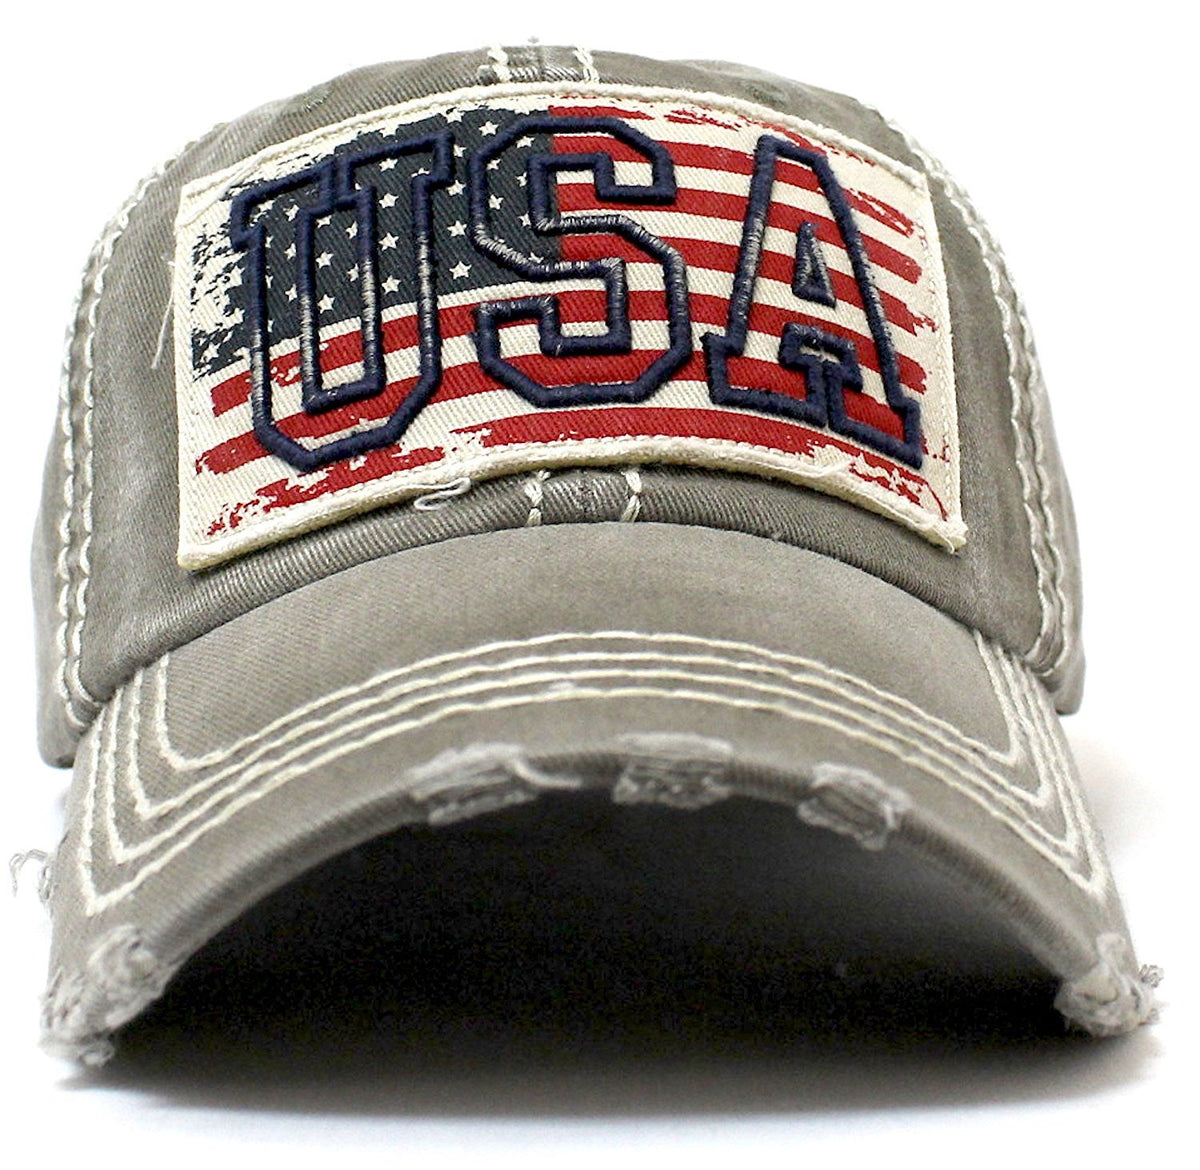 Vintage Red, White, & Blue Flag Patch Baseball Cap w/ "USA" Stitch Embroidery Overlay - Caps 'N Vintage 